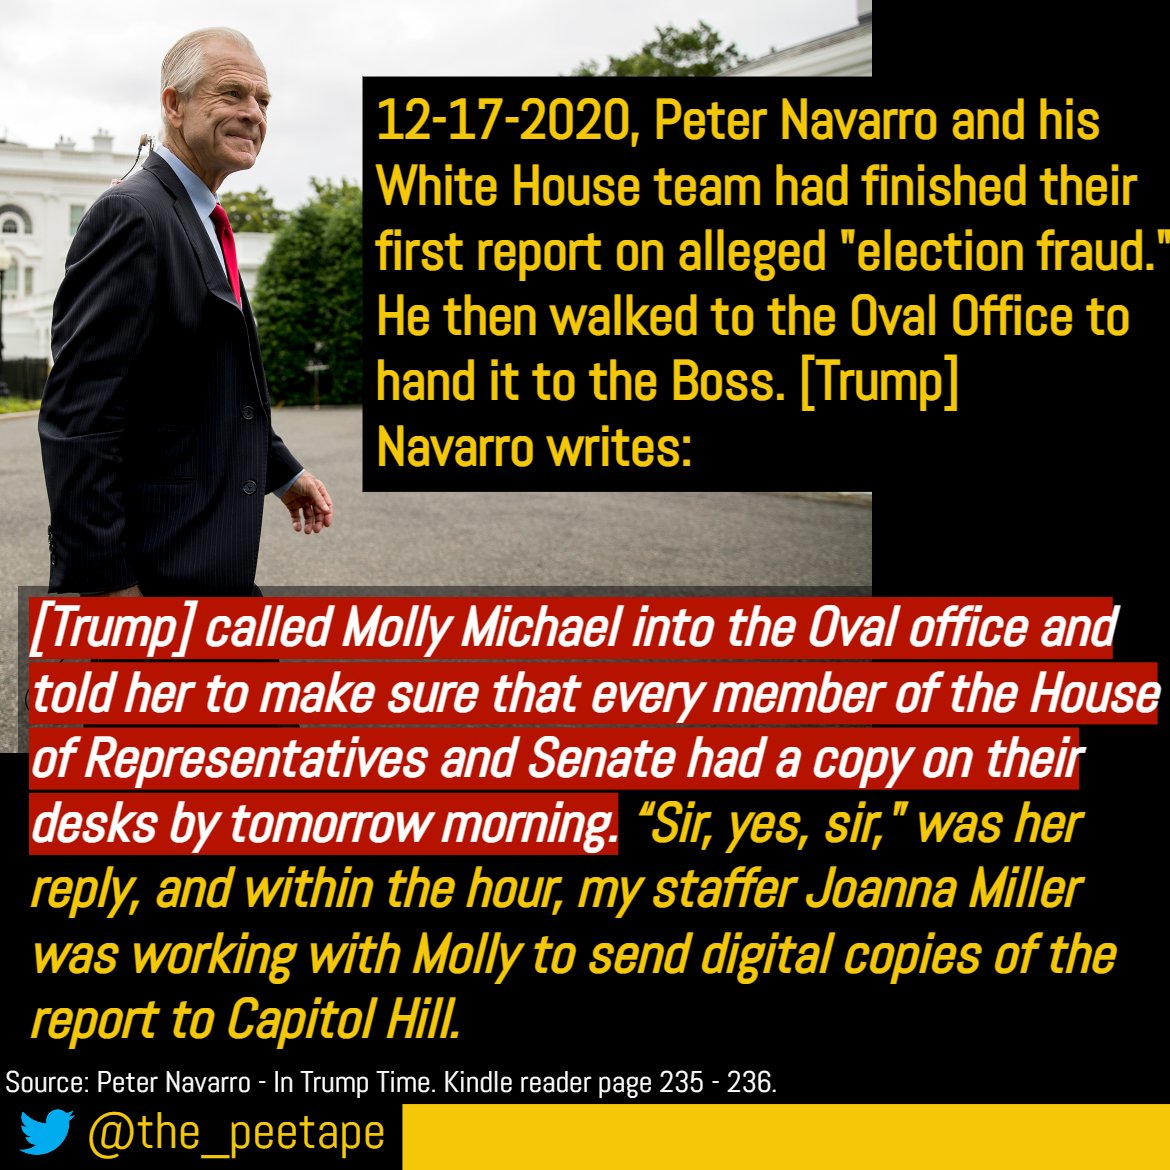 Donald Trump never had to convince his base the election was stolen. But in order for his coup to work, he needed the support of Members of Congress, (State) Senators, election officials and the VP. The Navarro Reports, which were a WH operation, were made for this purpose.